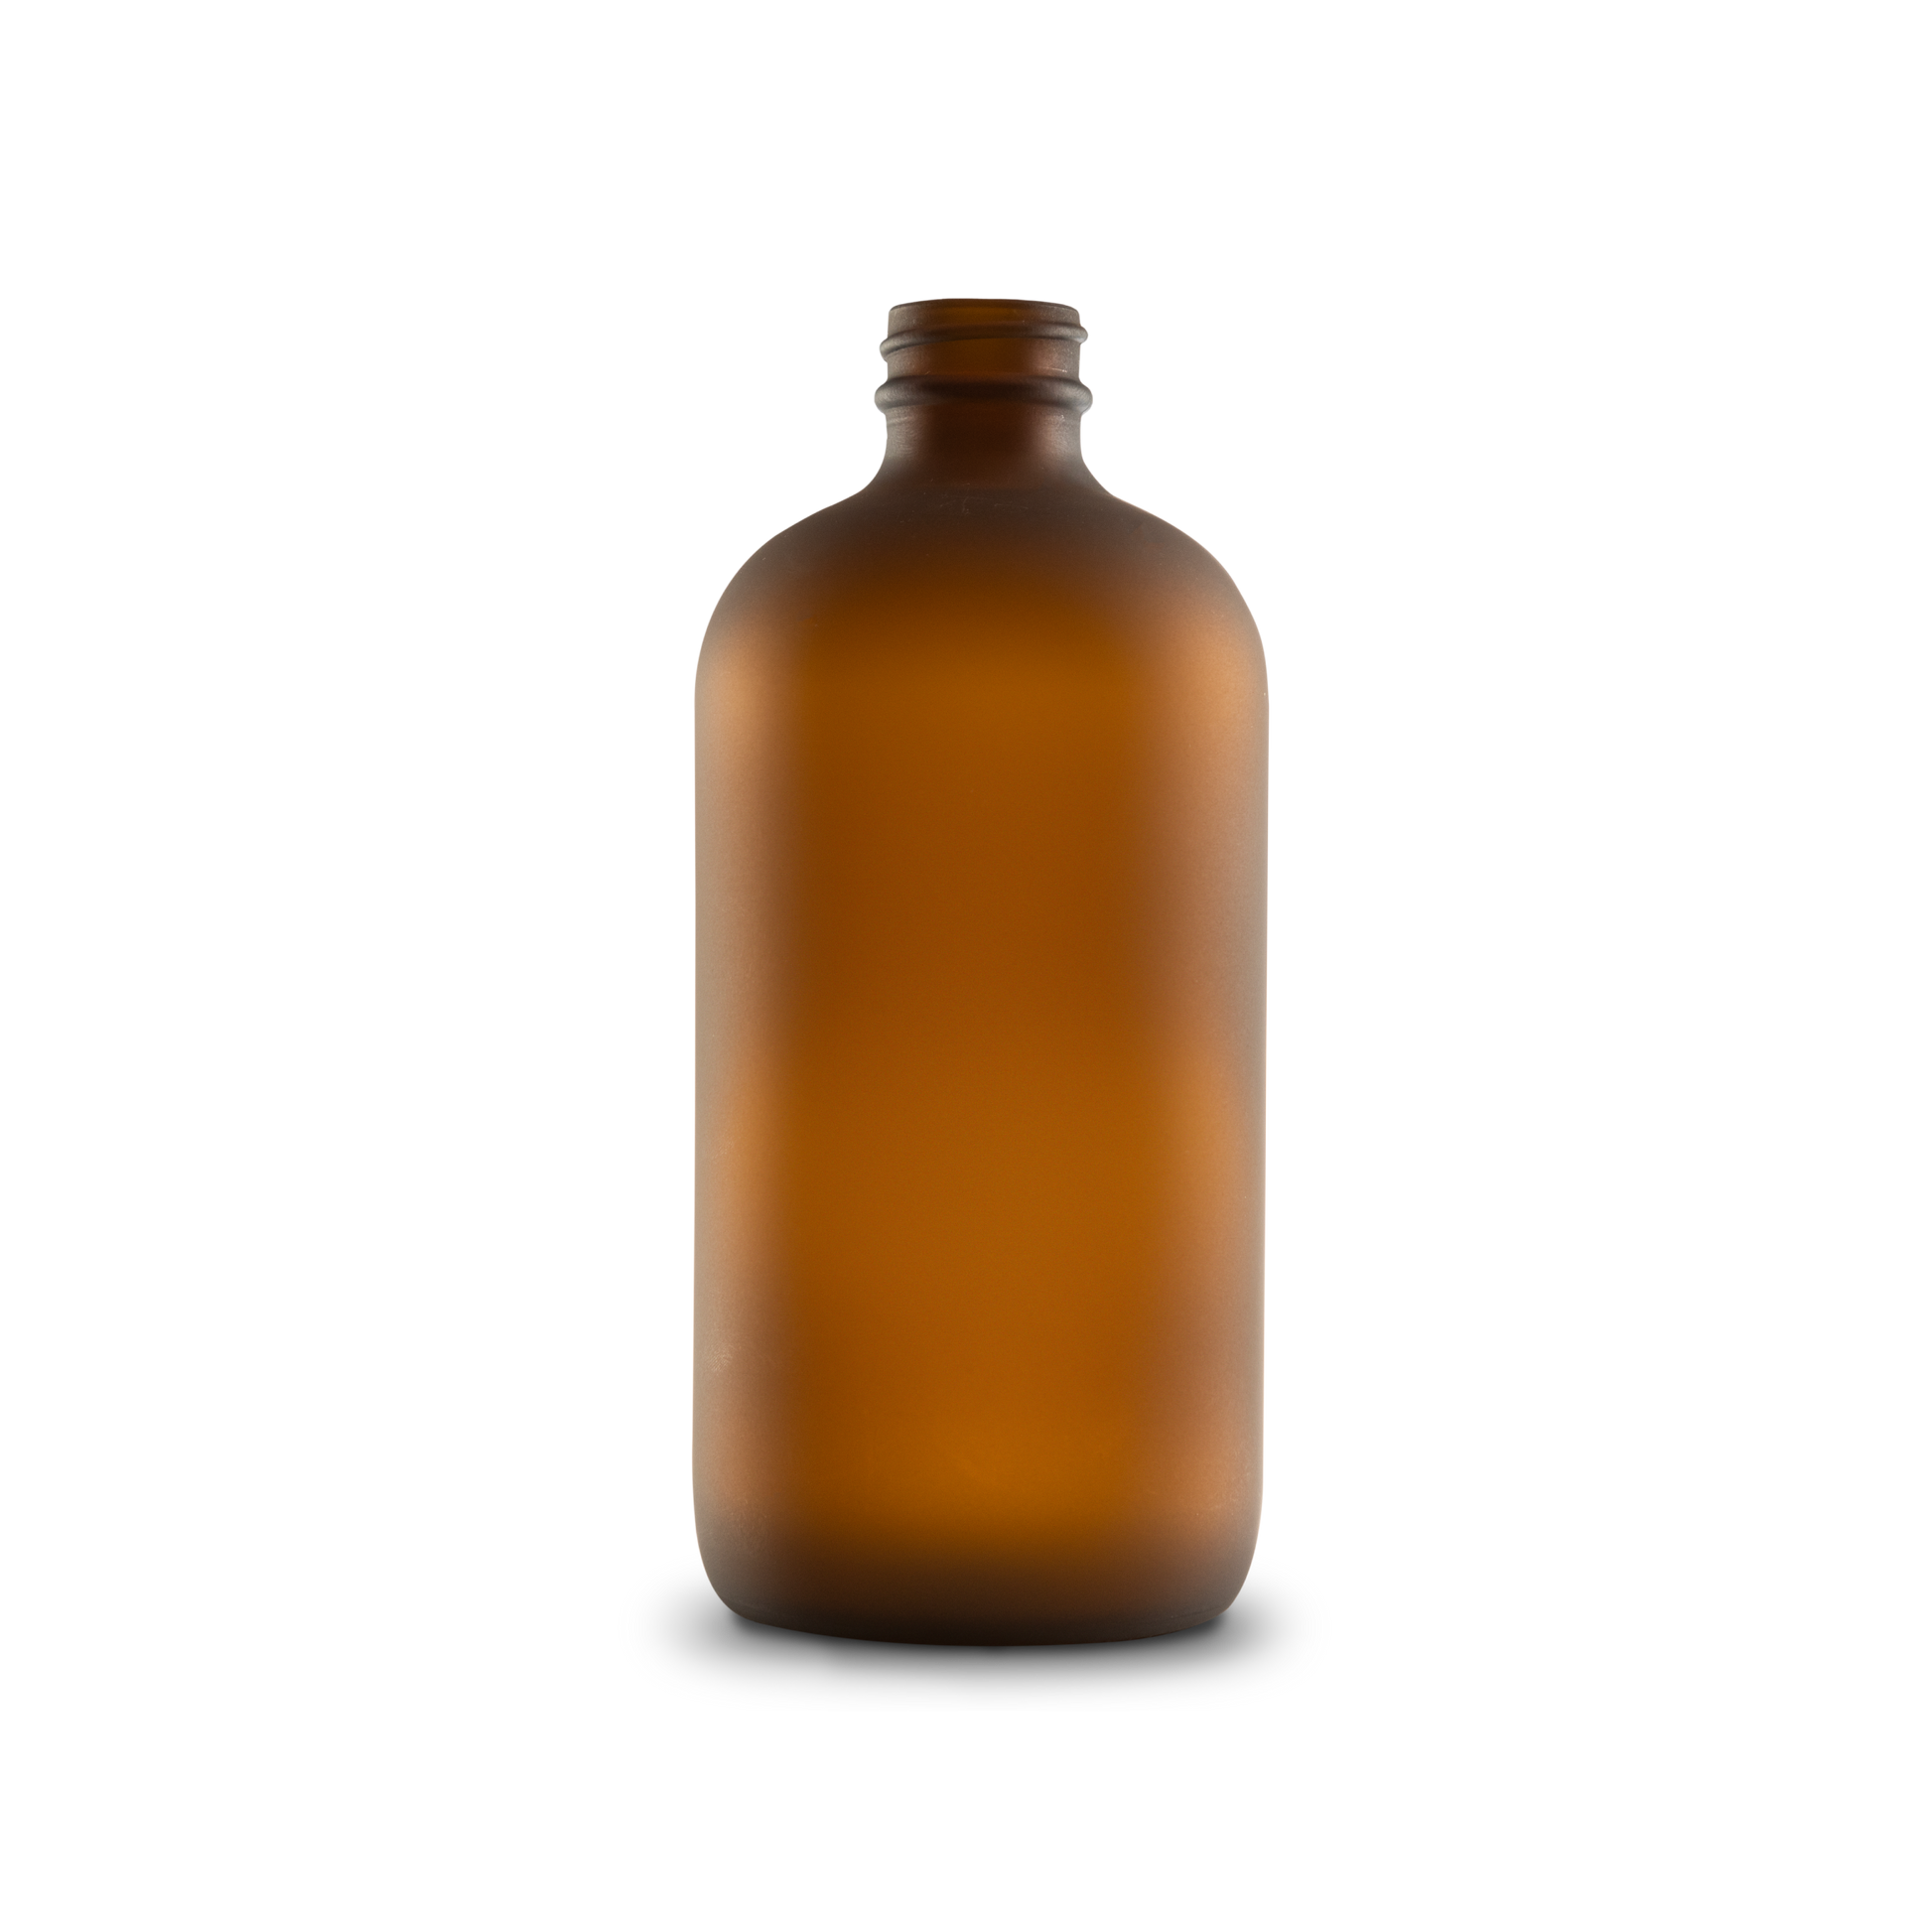 16 oz amber frosted glass bottles is a great choice for storing your liquid medicines, vitamins, and other liquids.